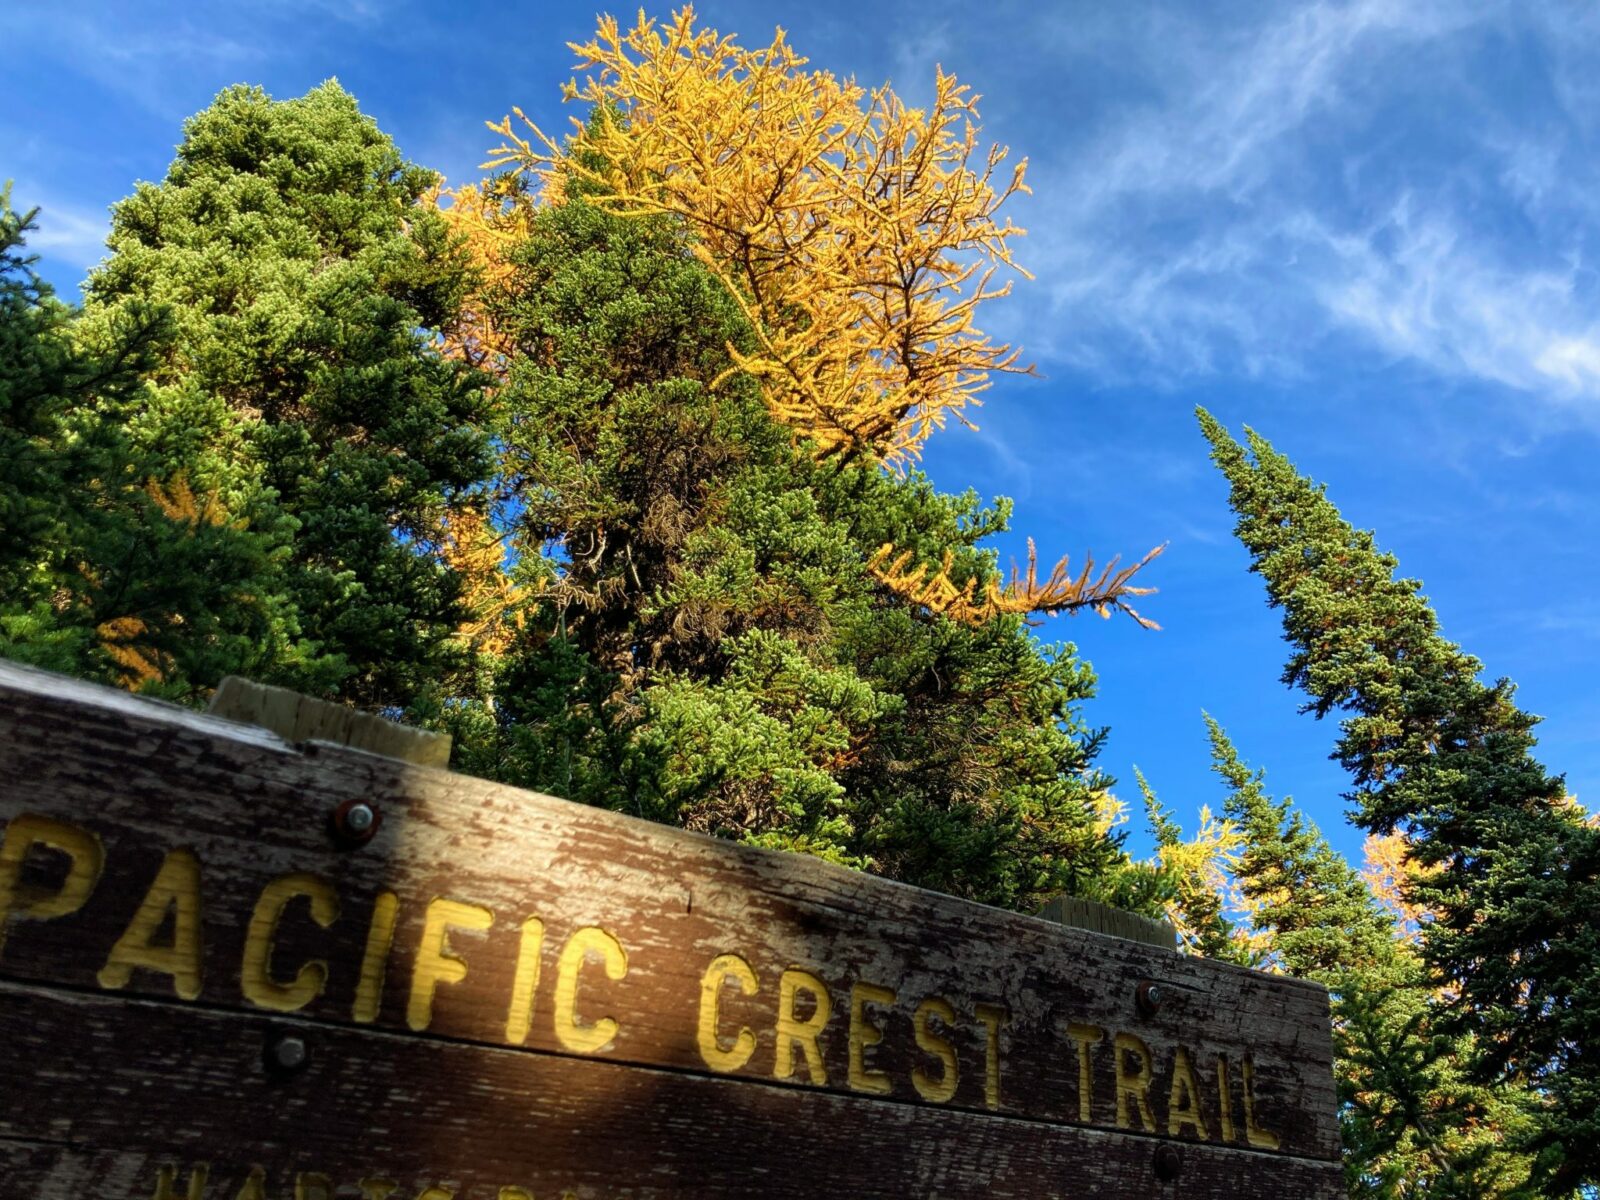 A weathered Pacific Crest Trail sign in the foreground against dark green evergreen trees and a golden larch tree against a blue sky